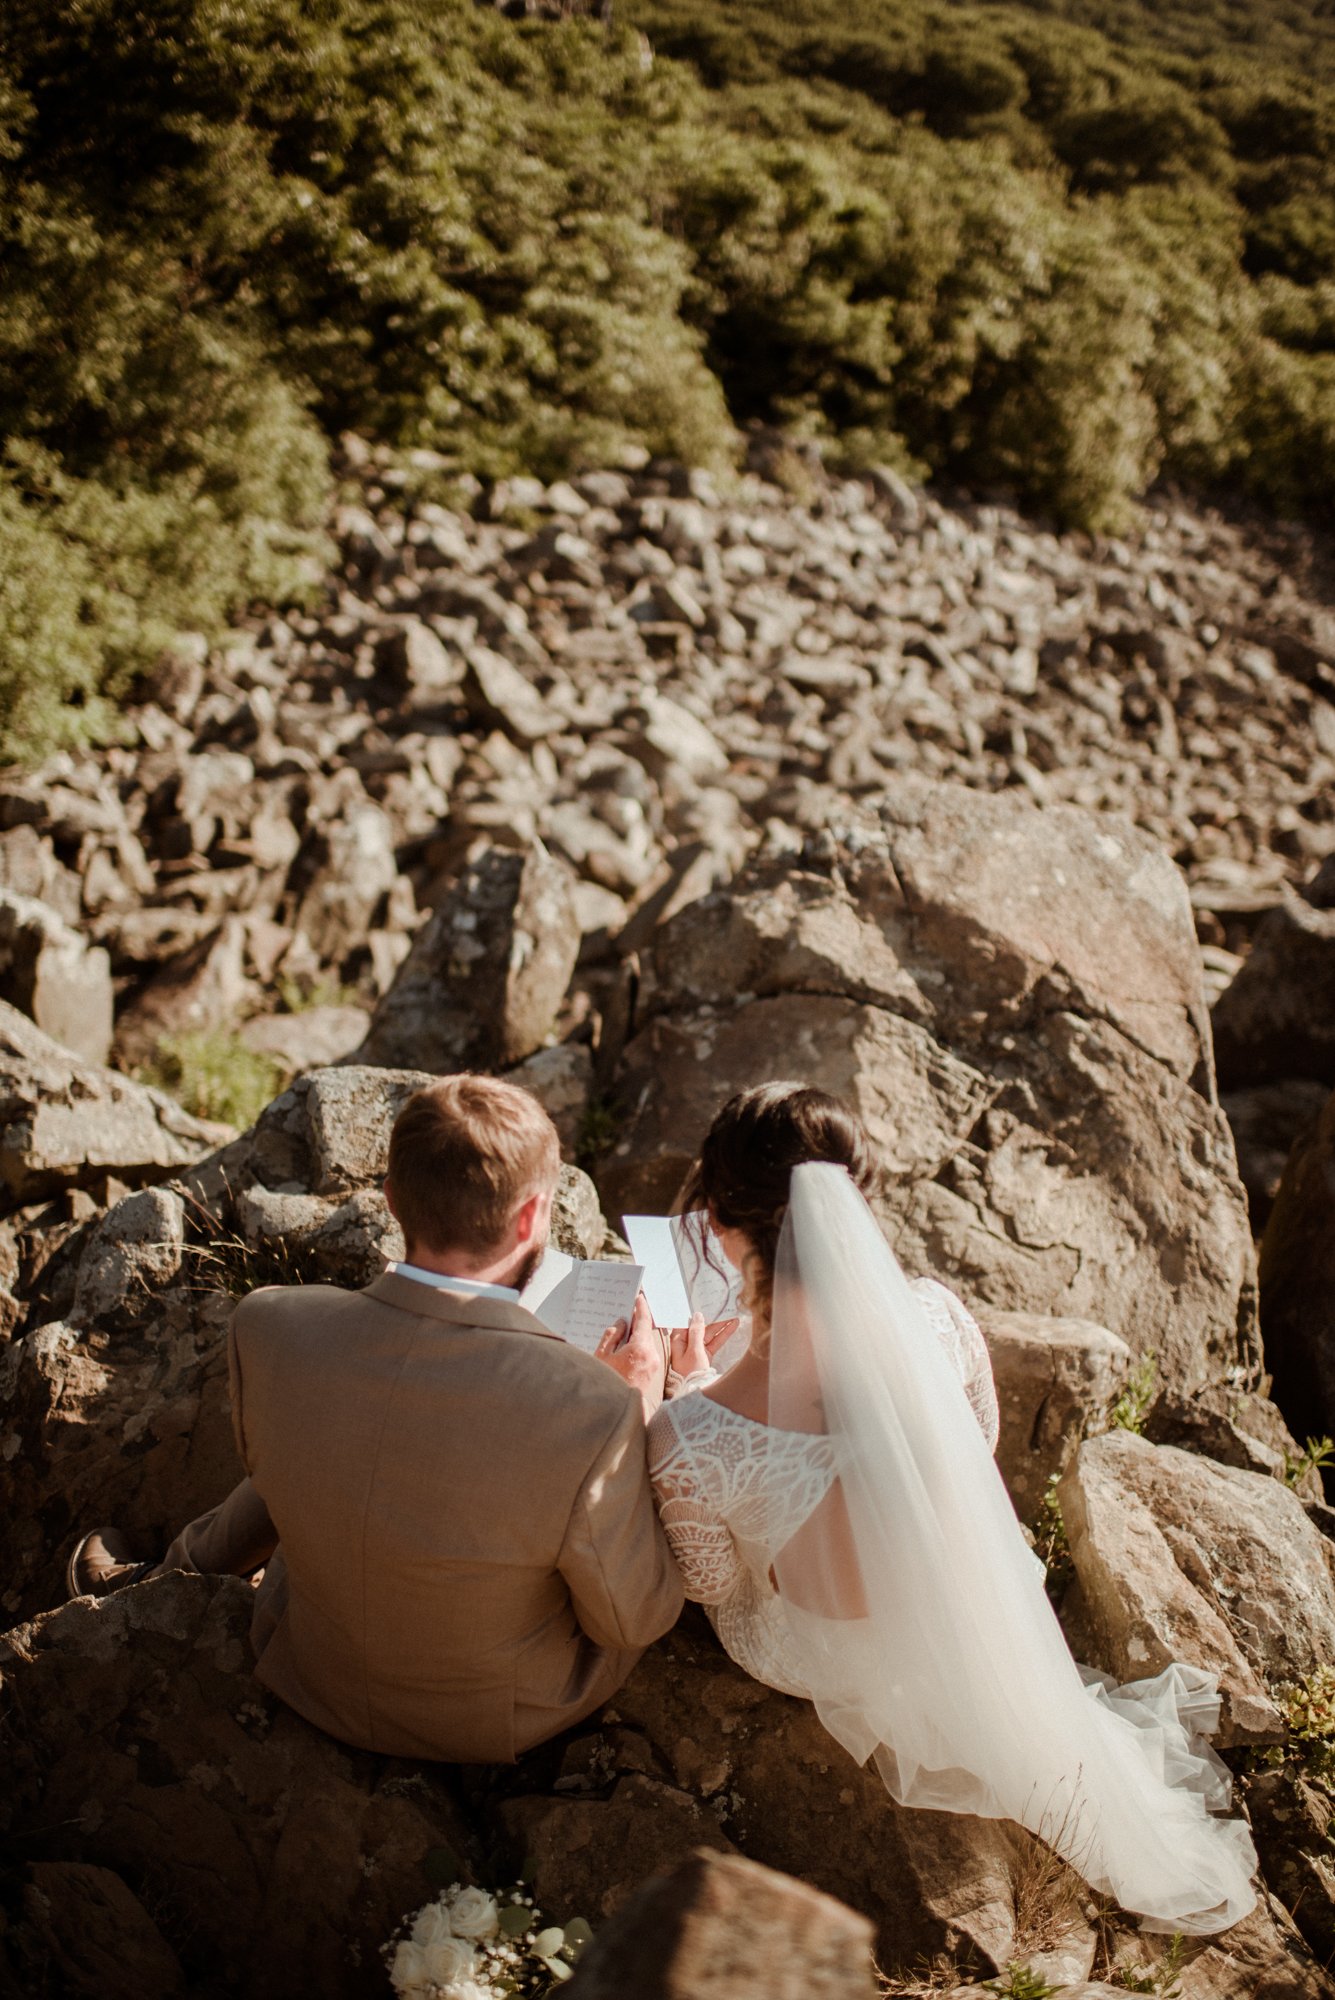 Sunset Elopement on Stony Man Summit in Shenandoah National Park - White Sails Creative Elopement Photography - July Elopement on the Blue Ridge Parkway_14.jpg